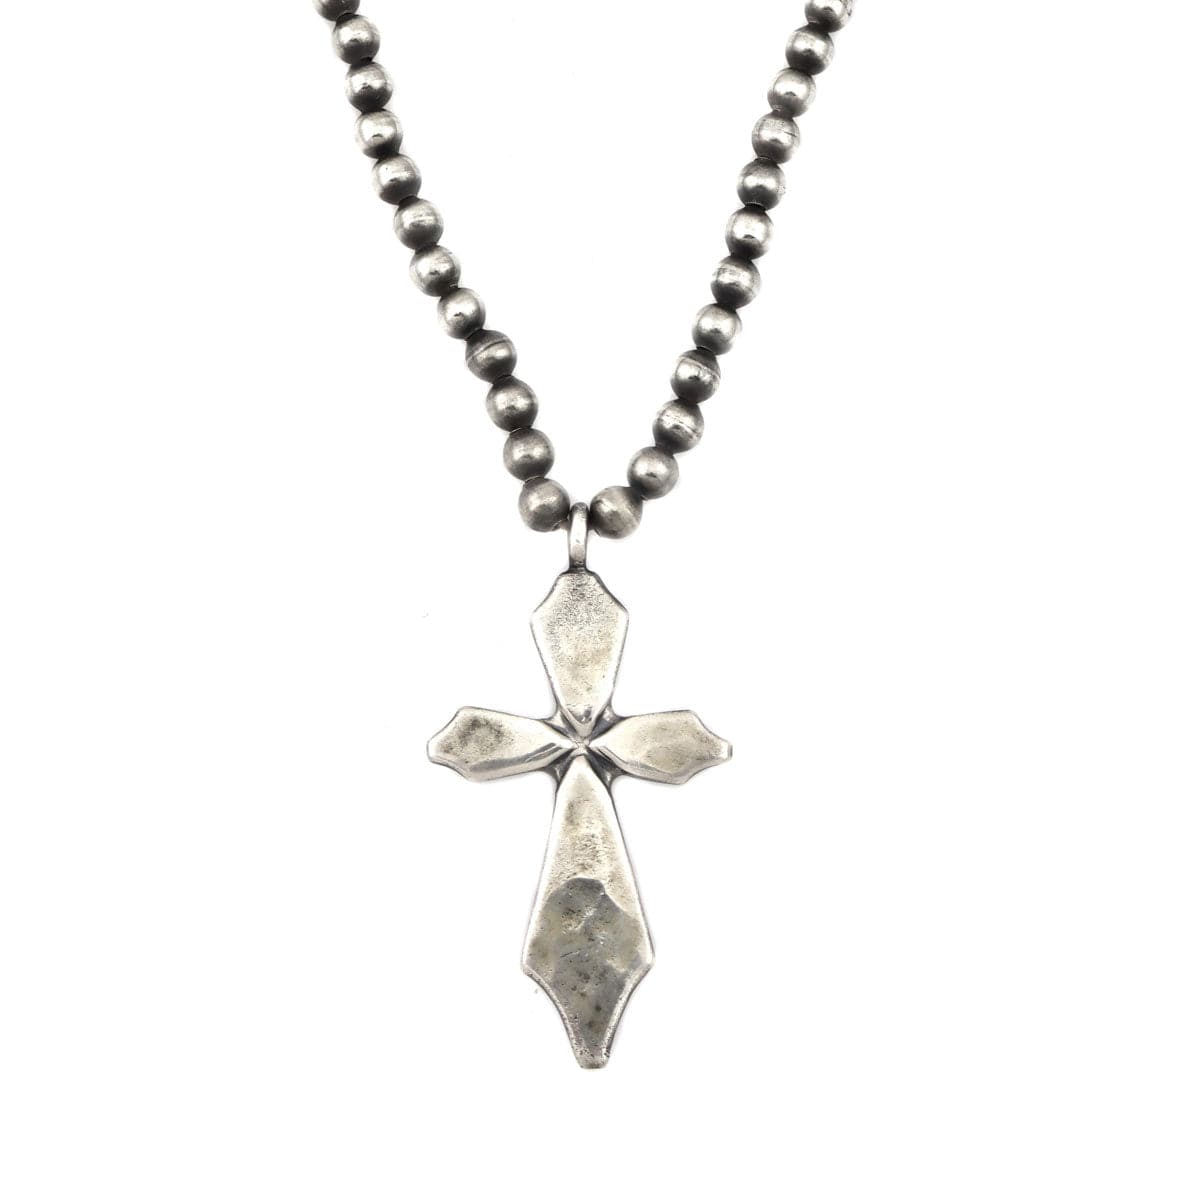 Miramontes - Old Style Necklace with Silver Beads and Sandcast Silver Cross Pendant (J91305-1221-034)1